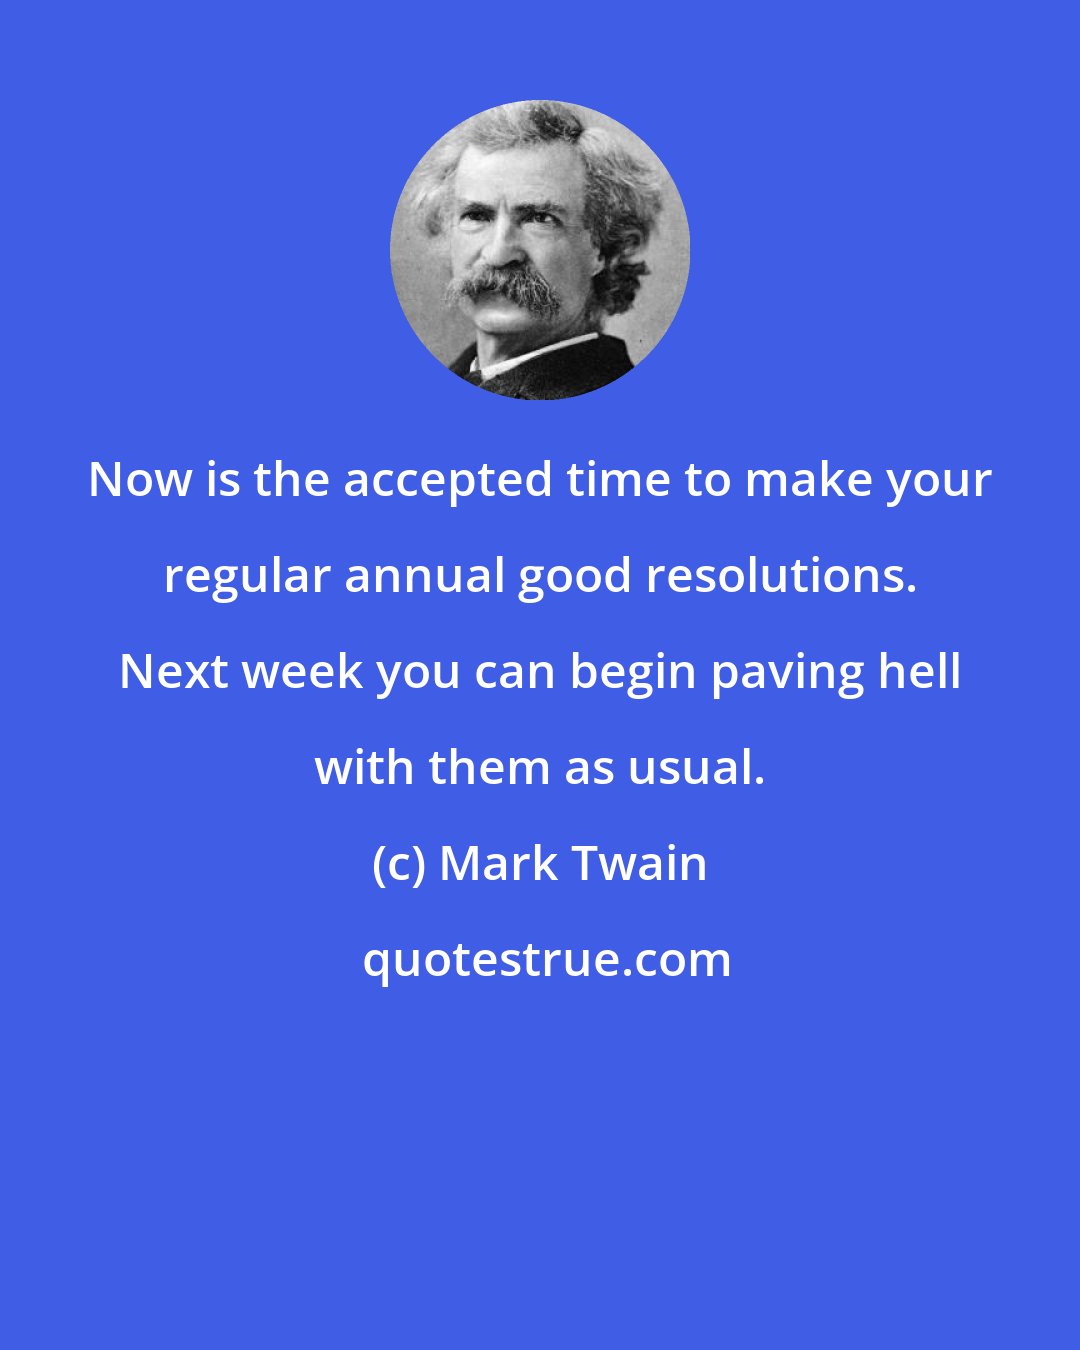 Mark Twain: Now is the accepted time to make your regular annual good resolutions. Next week you can begin paving hell with them as usual.